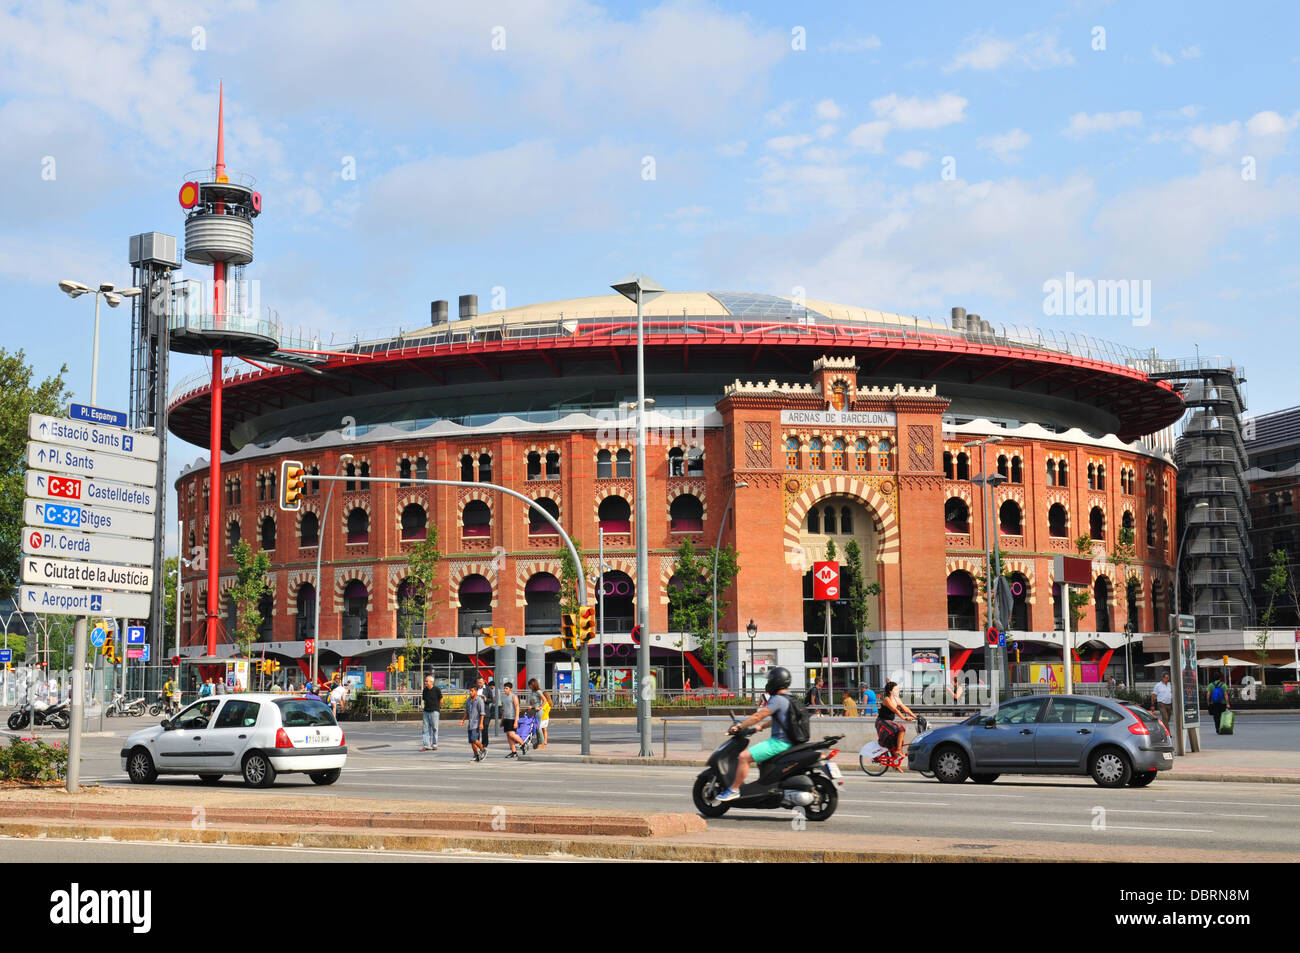 View of the famous Placa d'Espanya, one of Barcelona's most important squares. Stock Photo